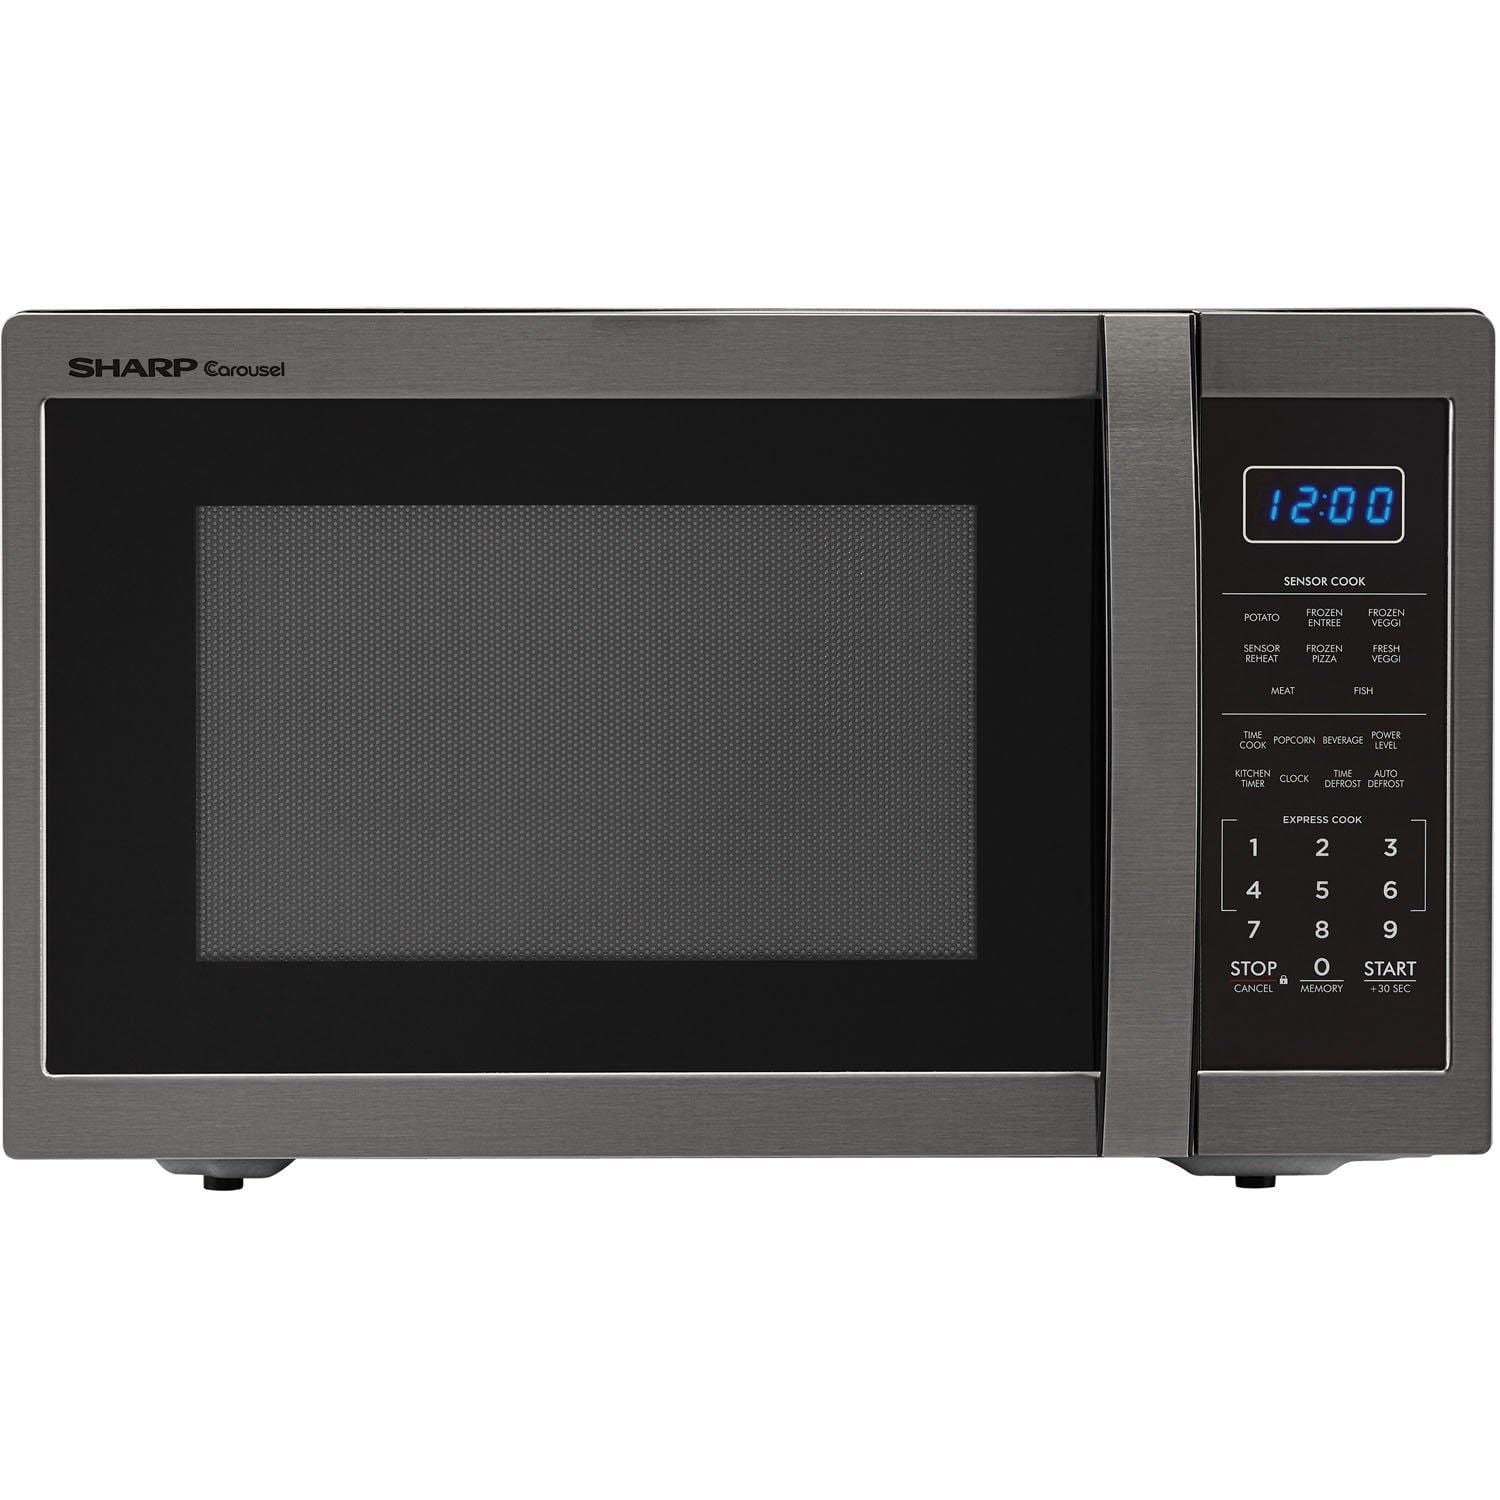 Sharp Sharp Carousel 1.4 Cu. Ft. 1100W Countertop Microwave Oven in Black Stainless Steel